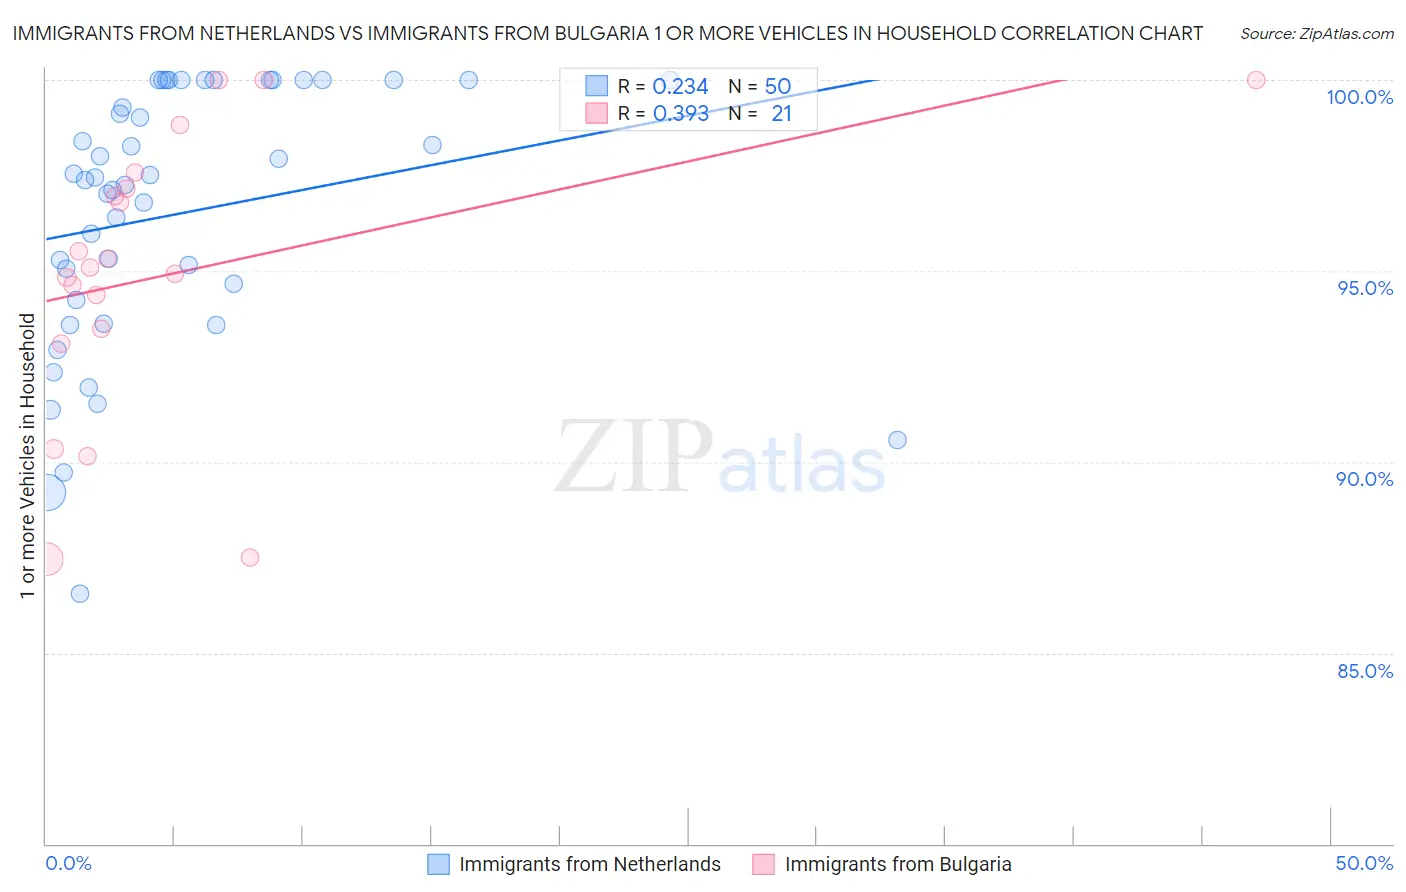 Immigrants from Netherlands vs Immigrants from Bulgaria 1 or more Vehicles in Household